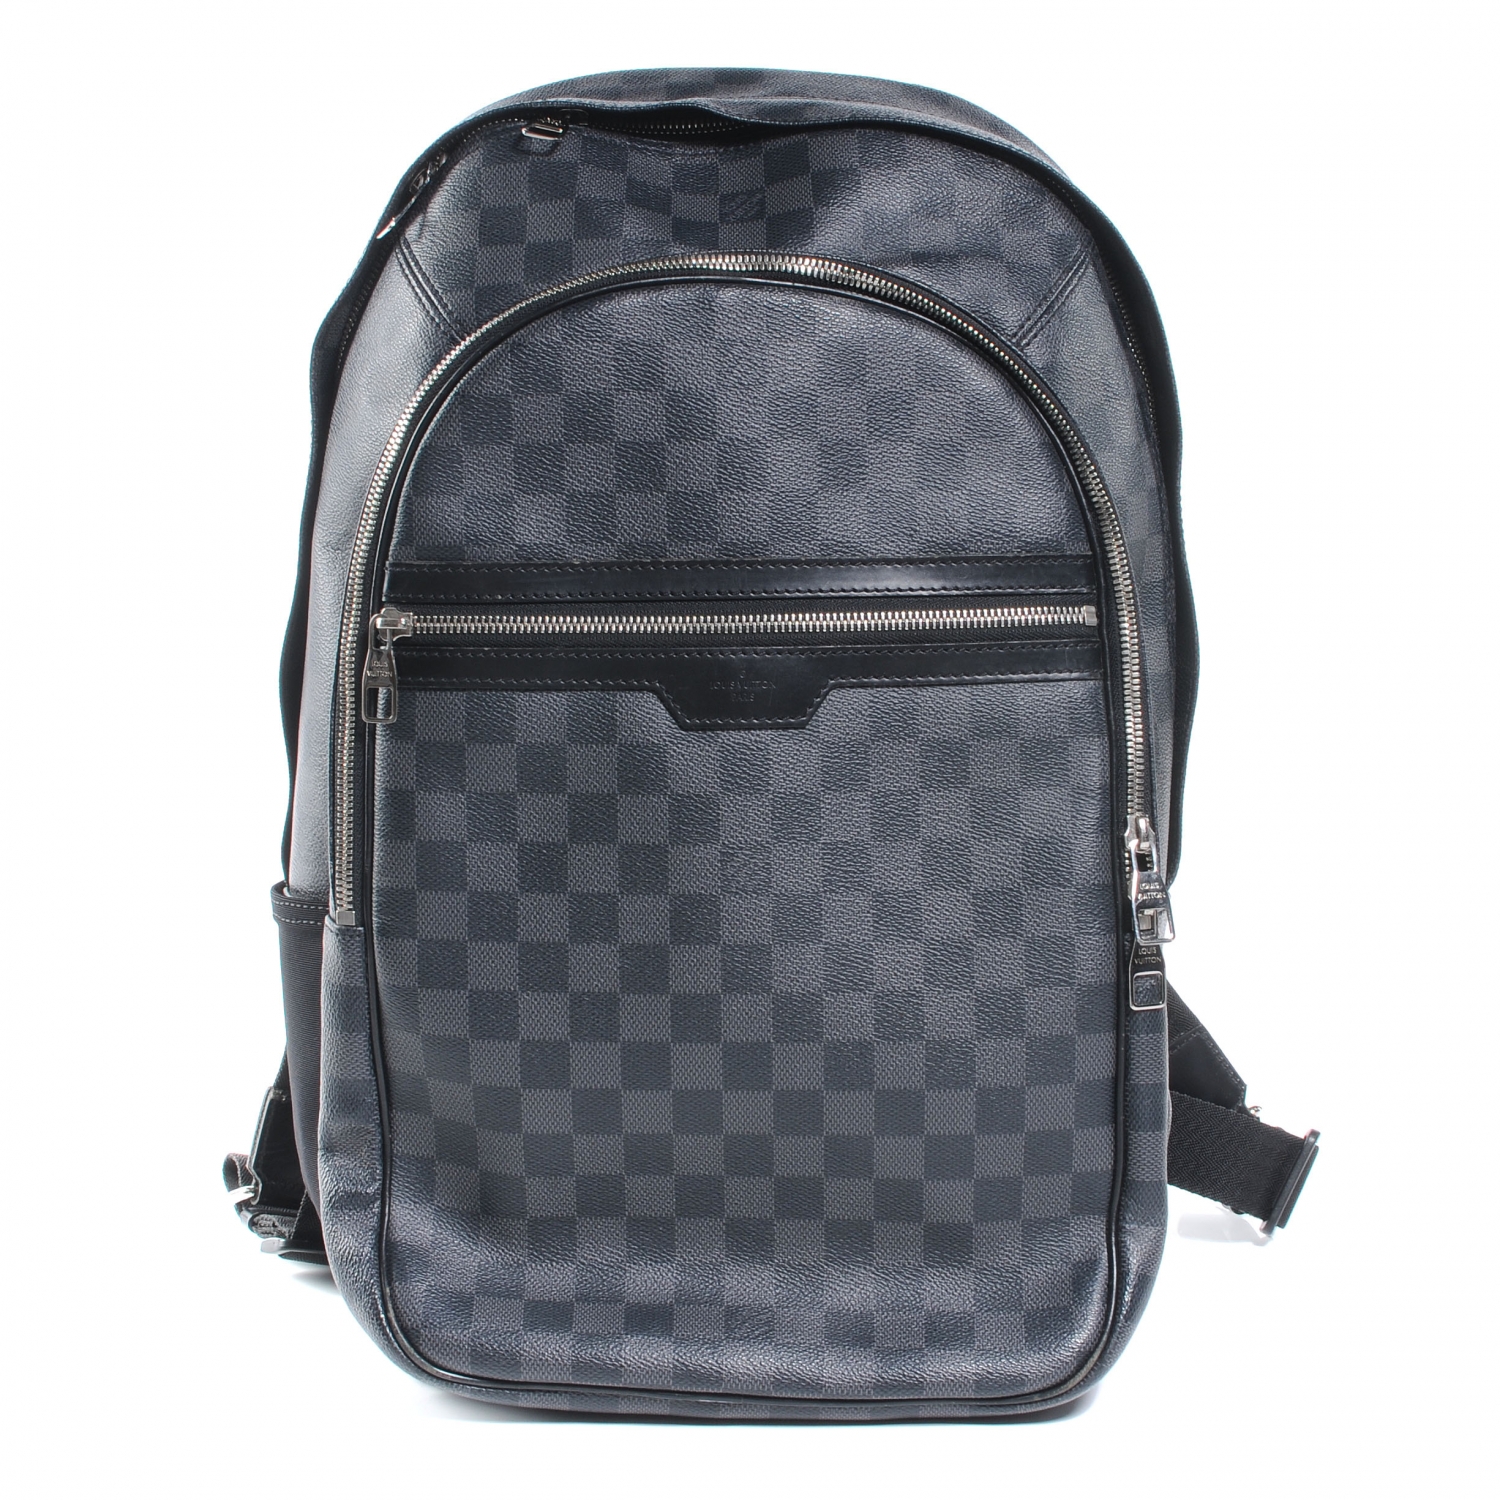 LOUIS VUITTON MICHAEL ORIGINAL BACKPACK: Would love to see Louis vuitton  bring there exclusive branding of women's and men's bags, accessories,  clothes etc in the future and add a bit of more